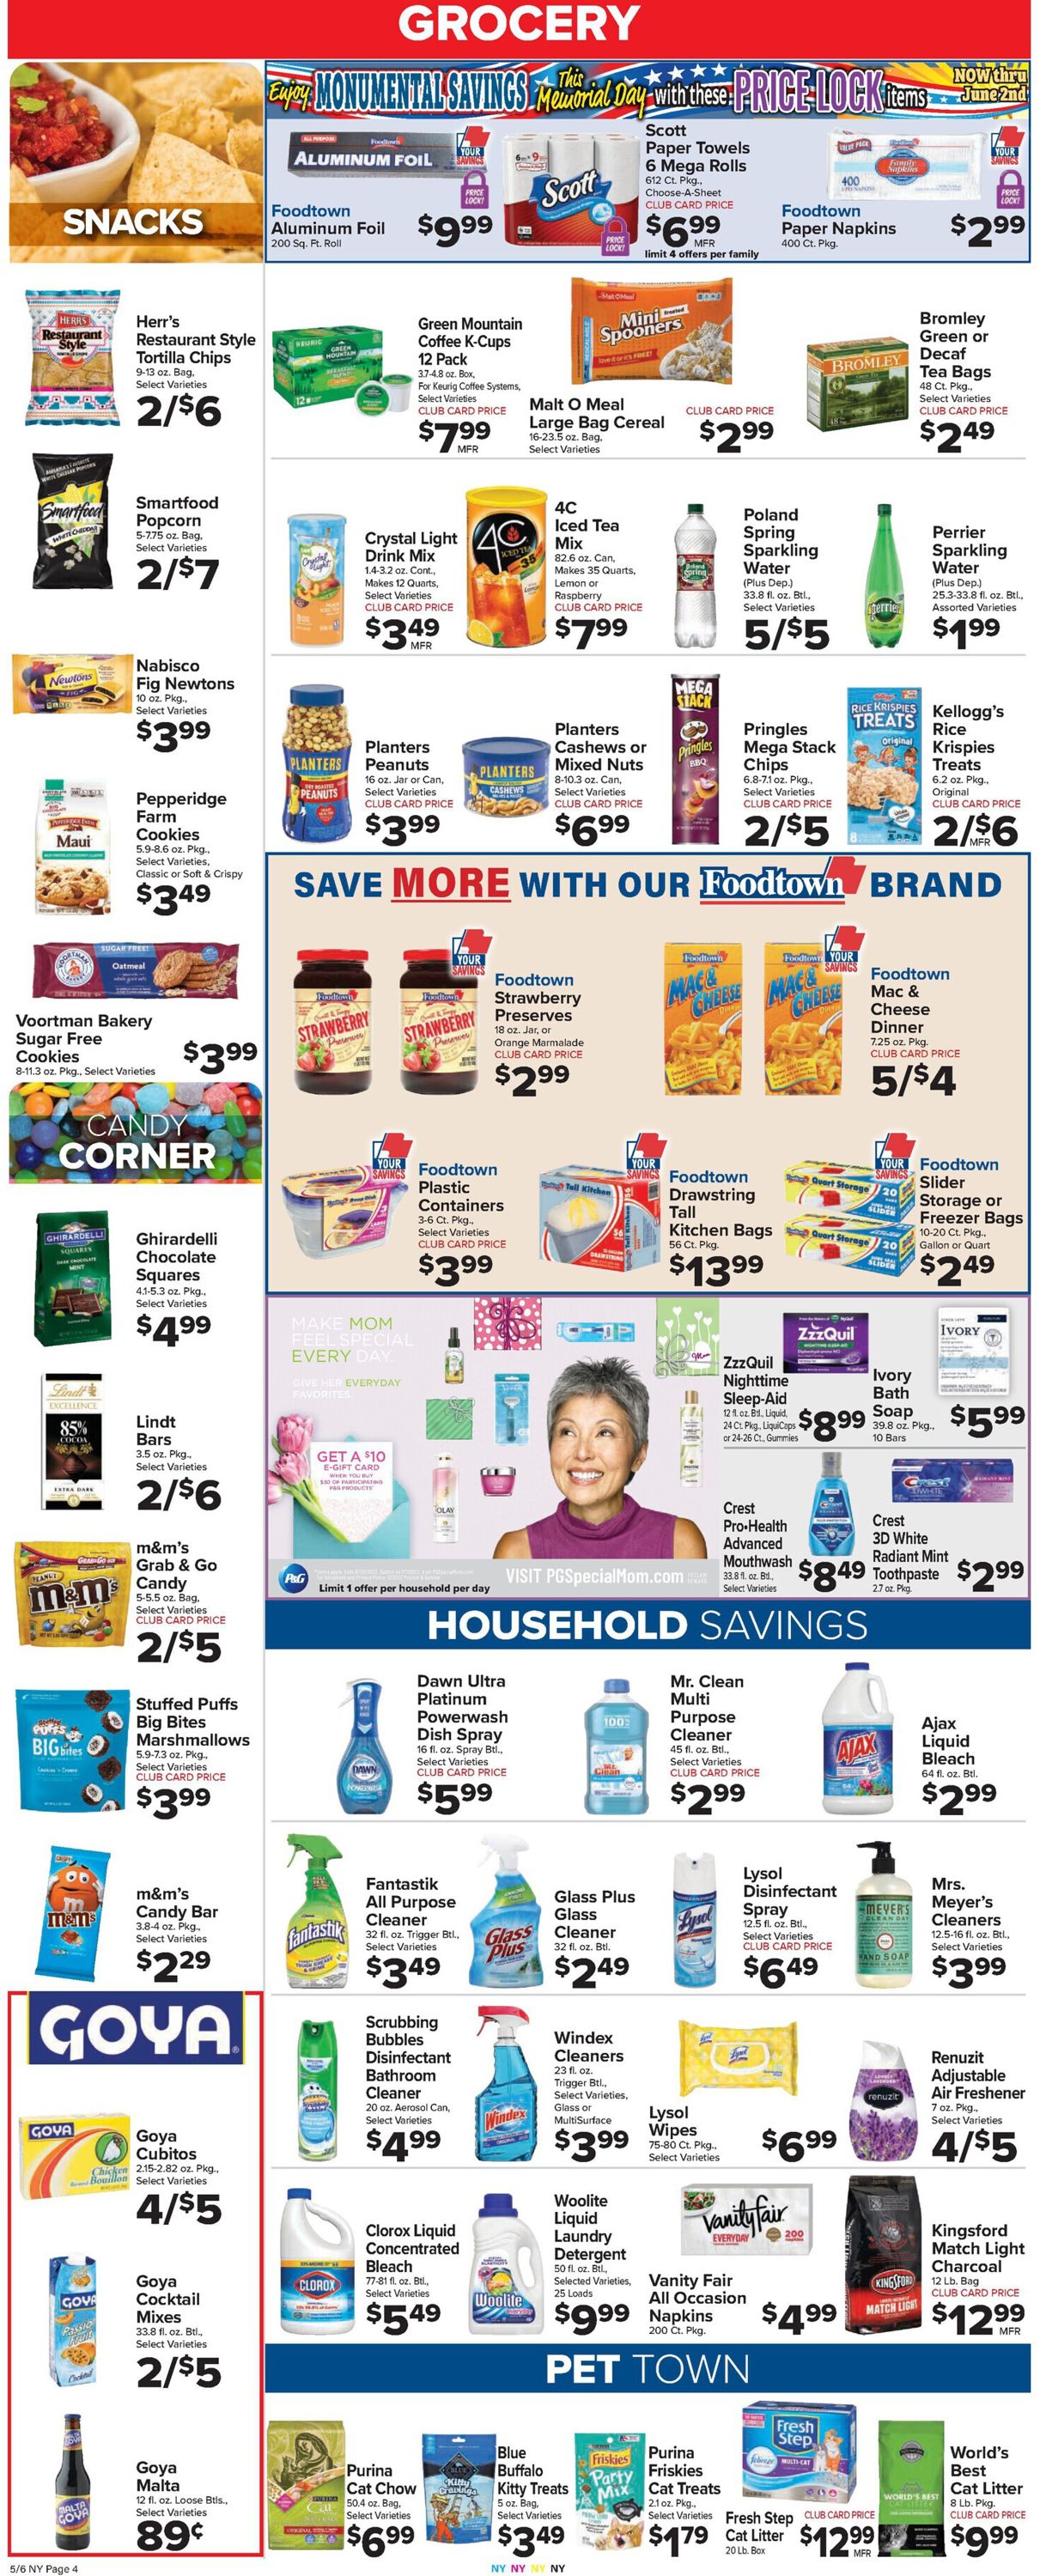 Foodtown Ad from 05/06/2022